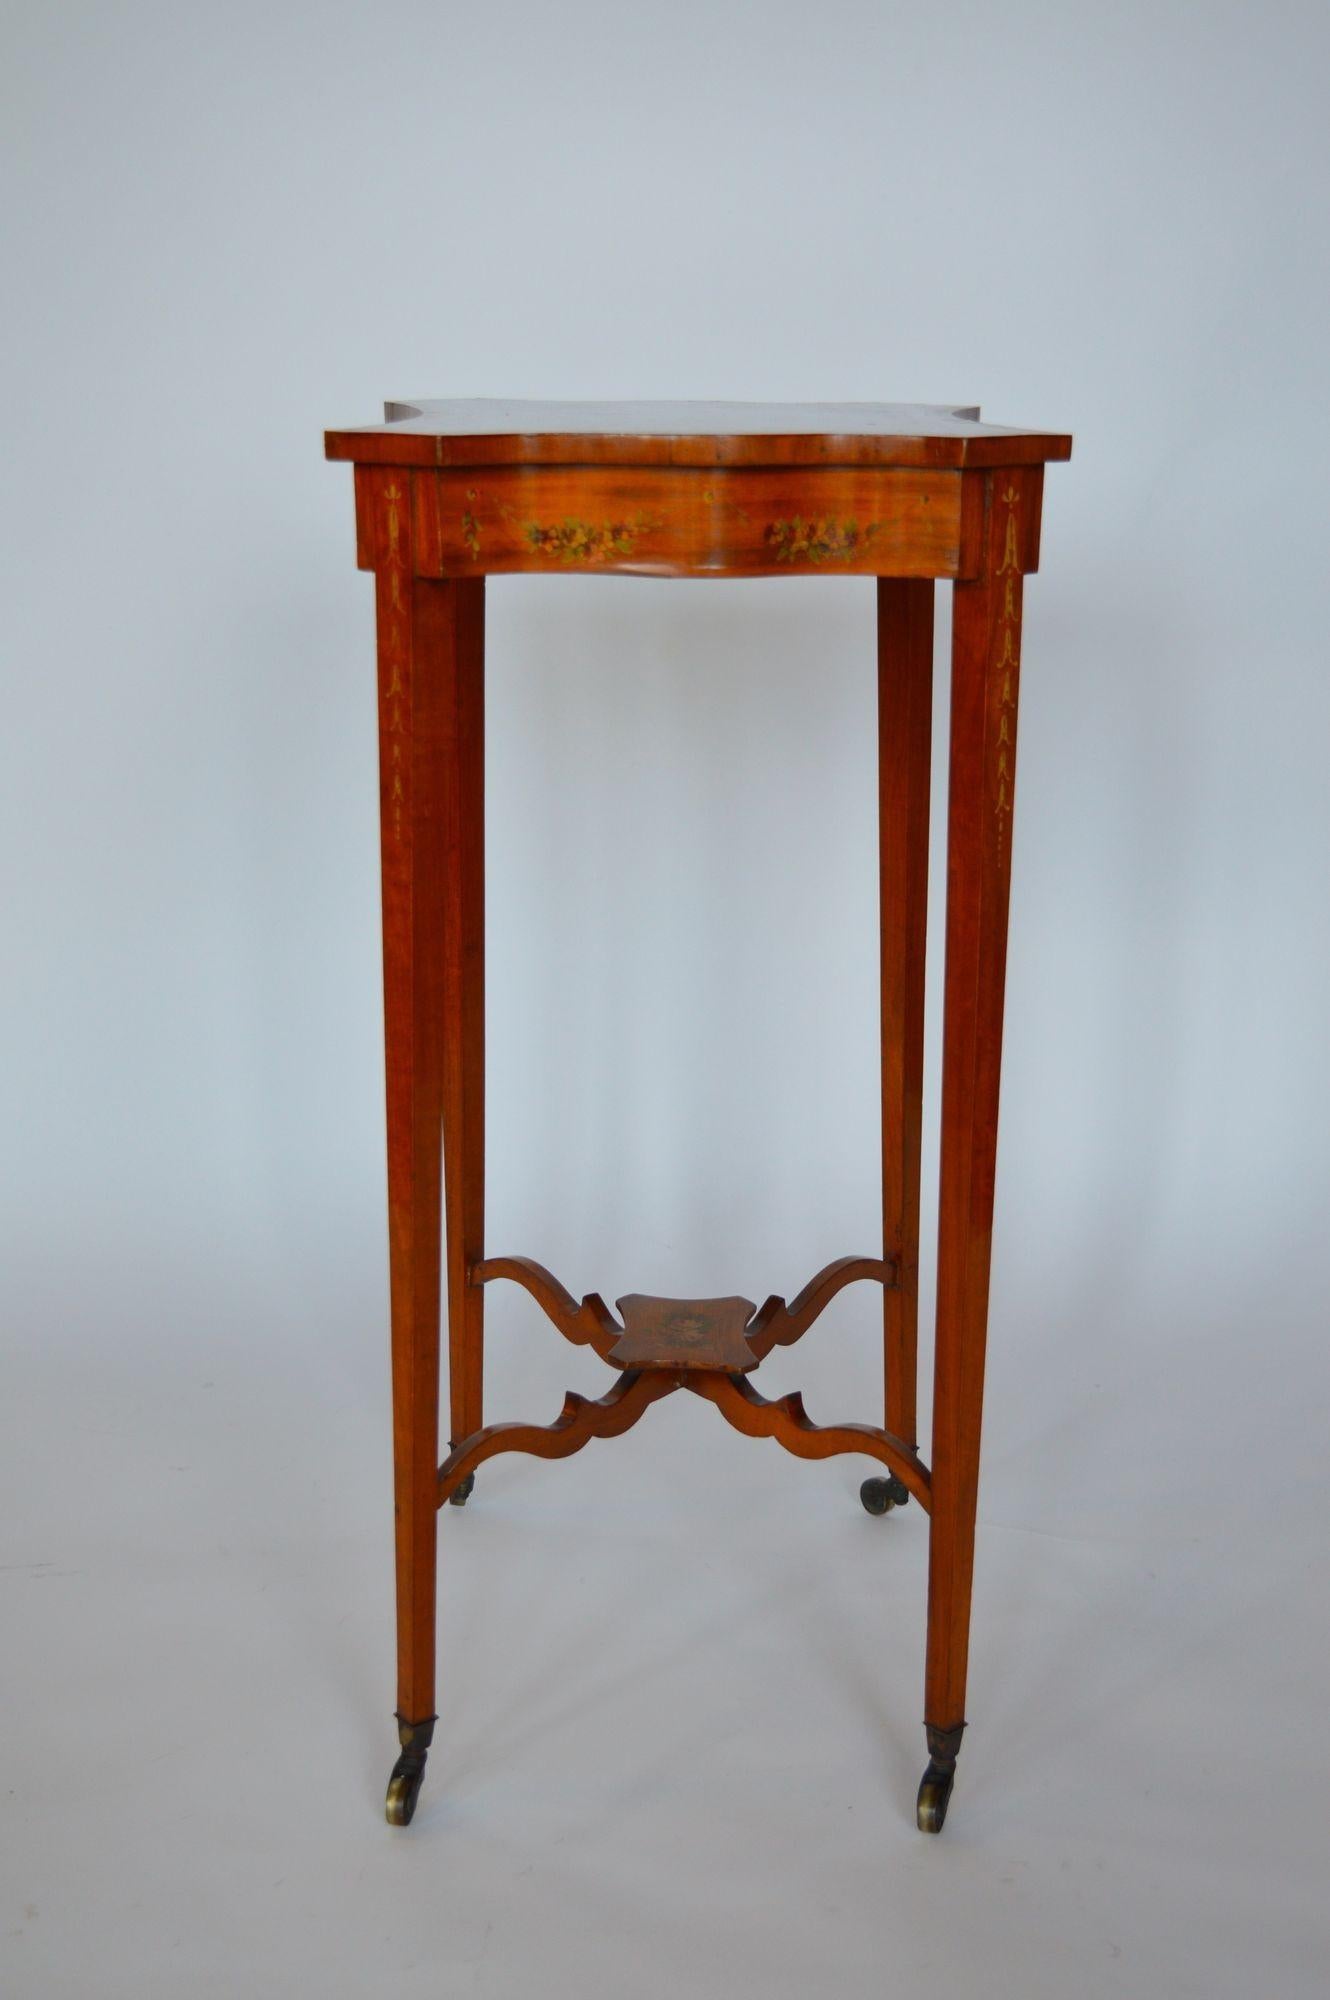 Early 20th Century Adam Style Scallop Form Table For Sale